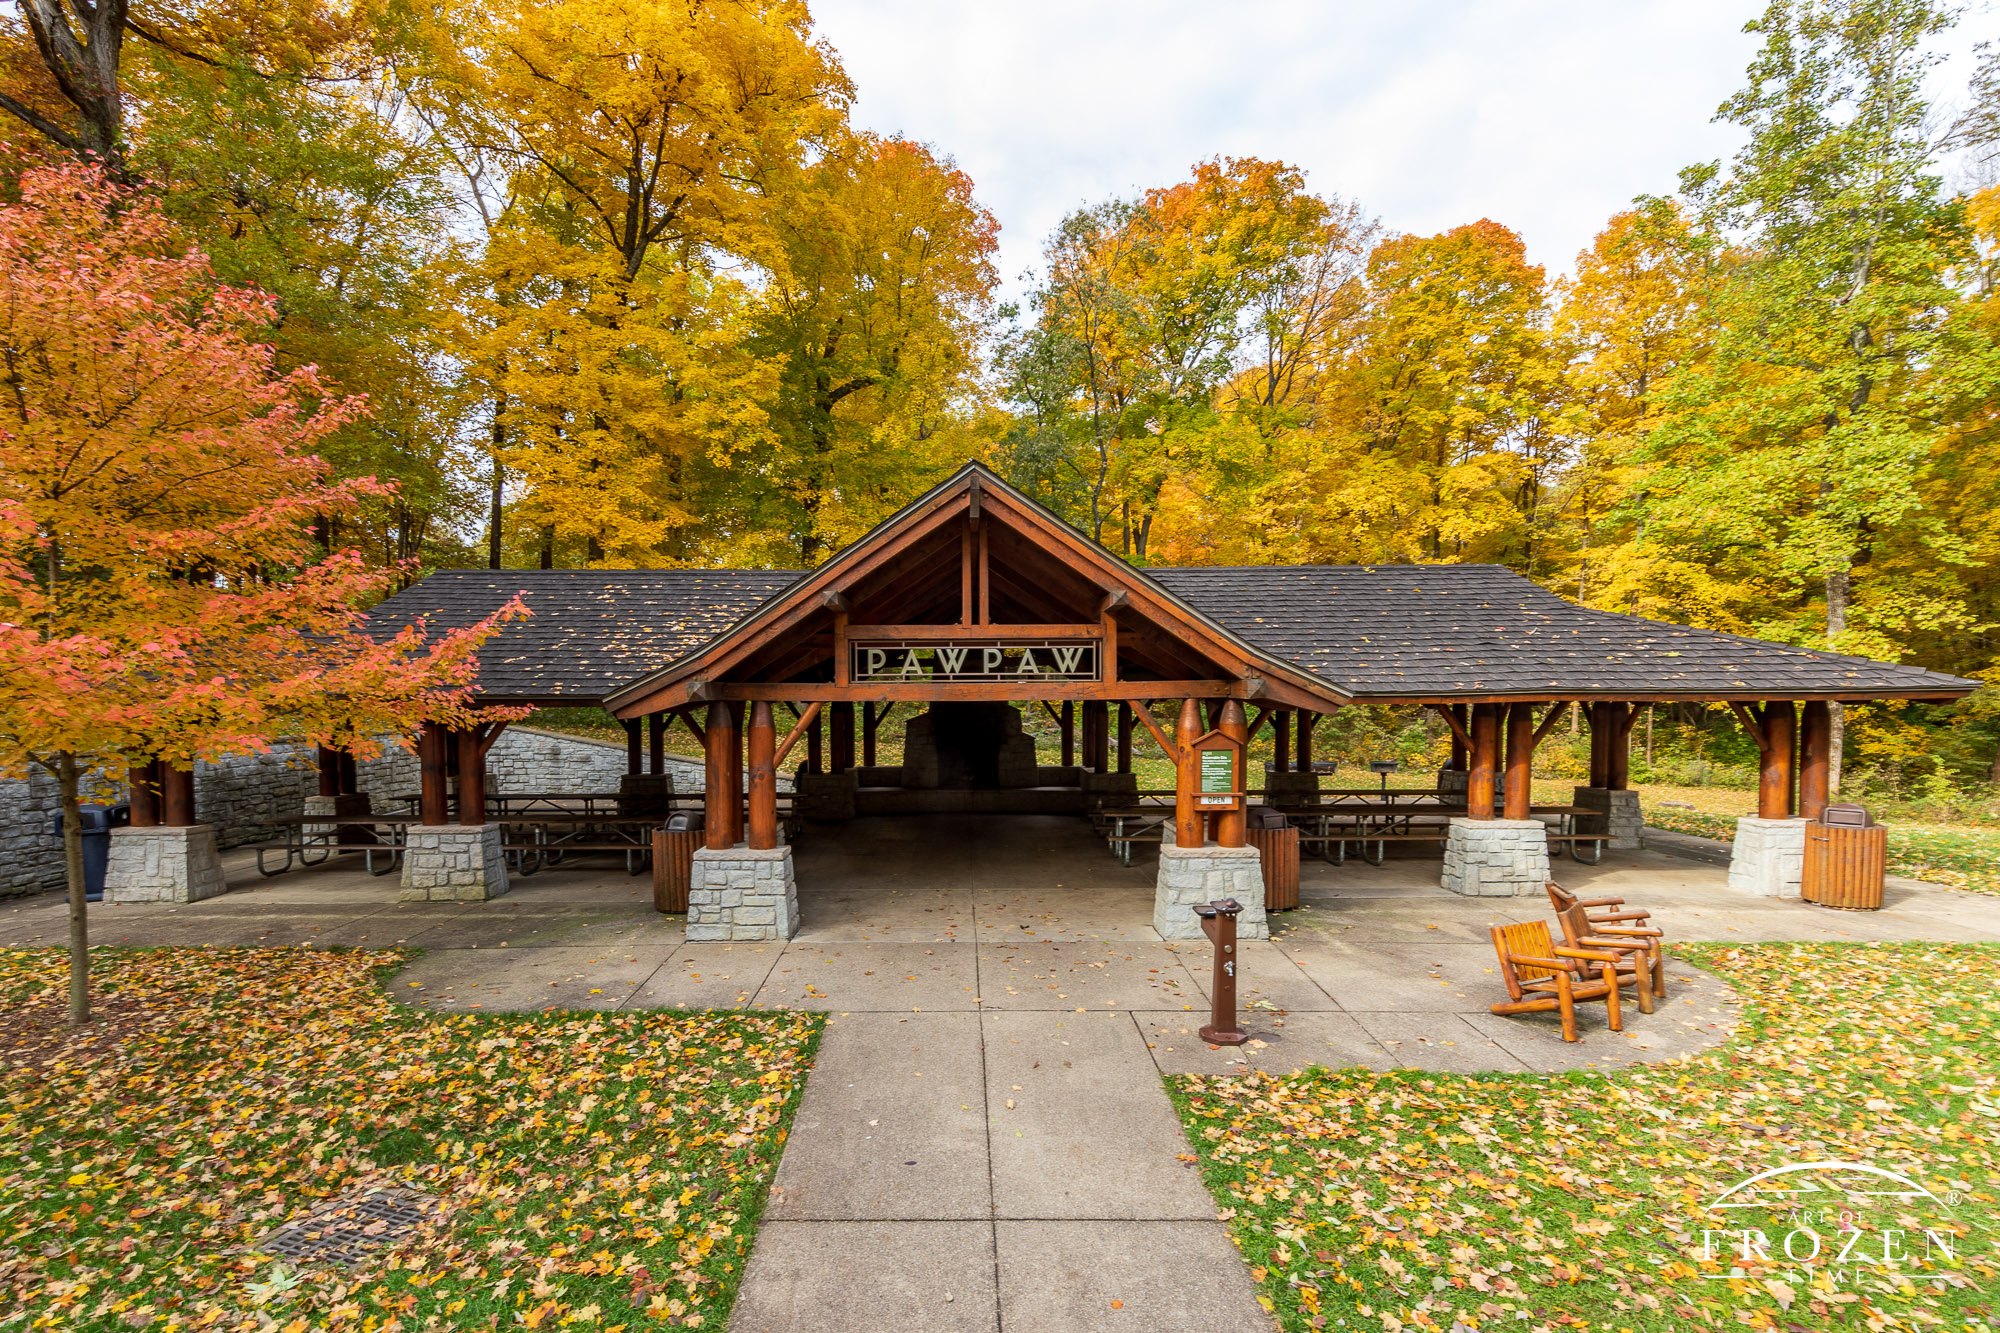 A slightly elevated view of Paw Paw Camp which features an Adirondack picnic shelter surrounded by colorful autumn trees basking in warm light